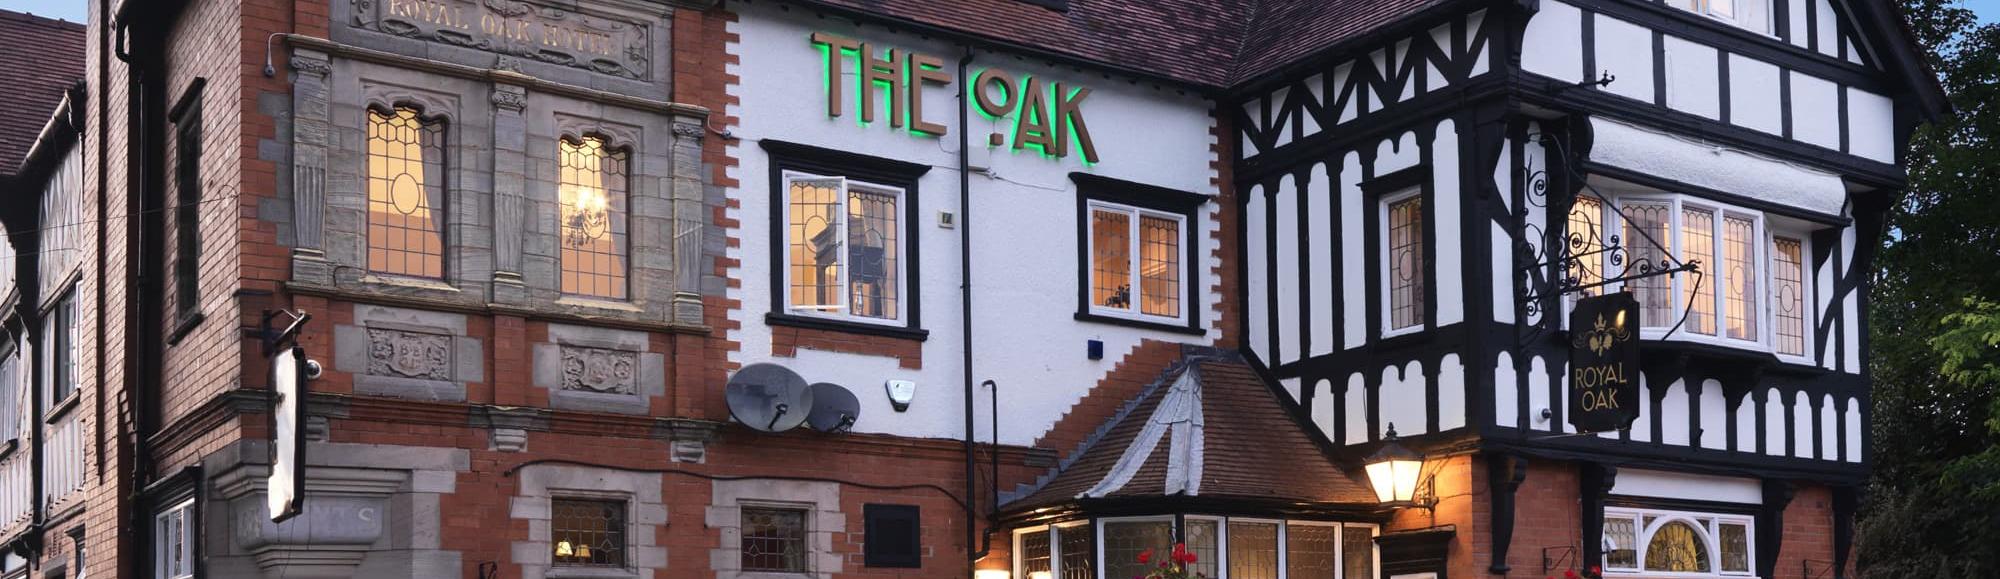 The Royal Oak: Offers